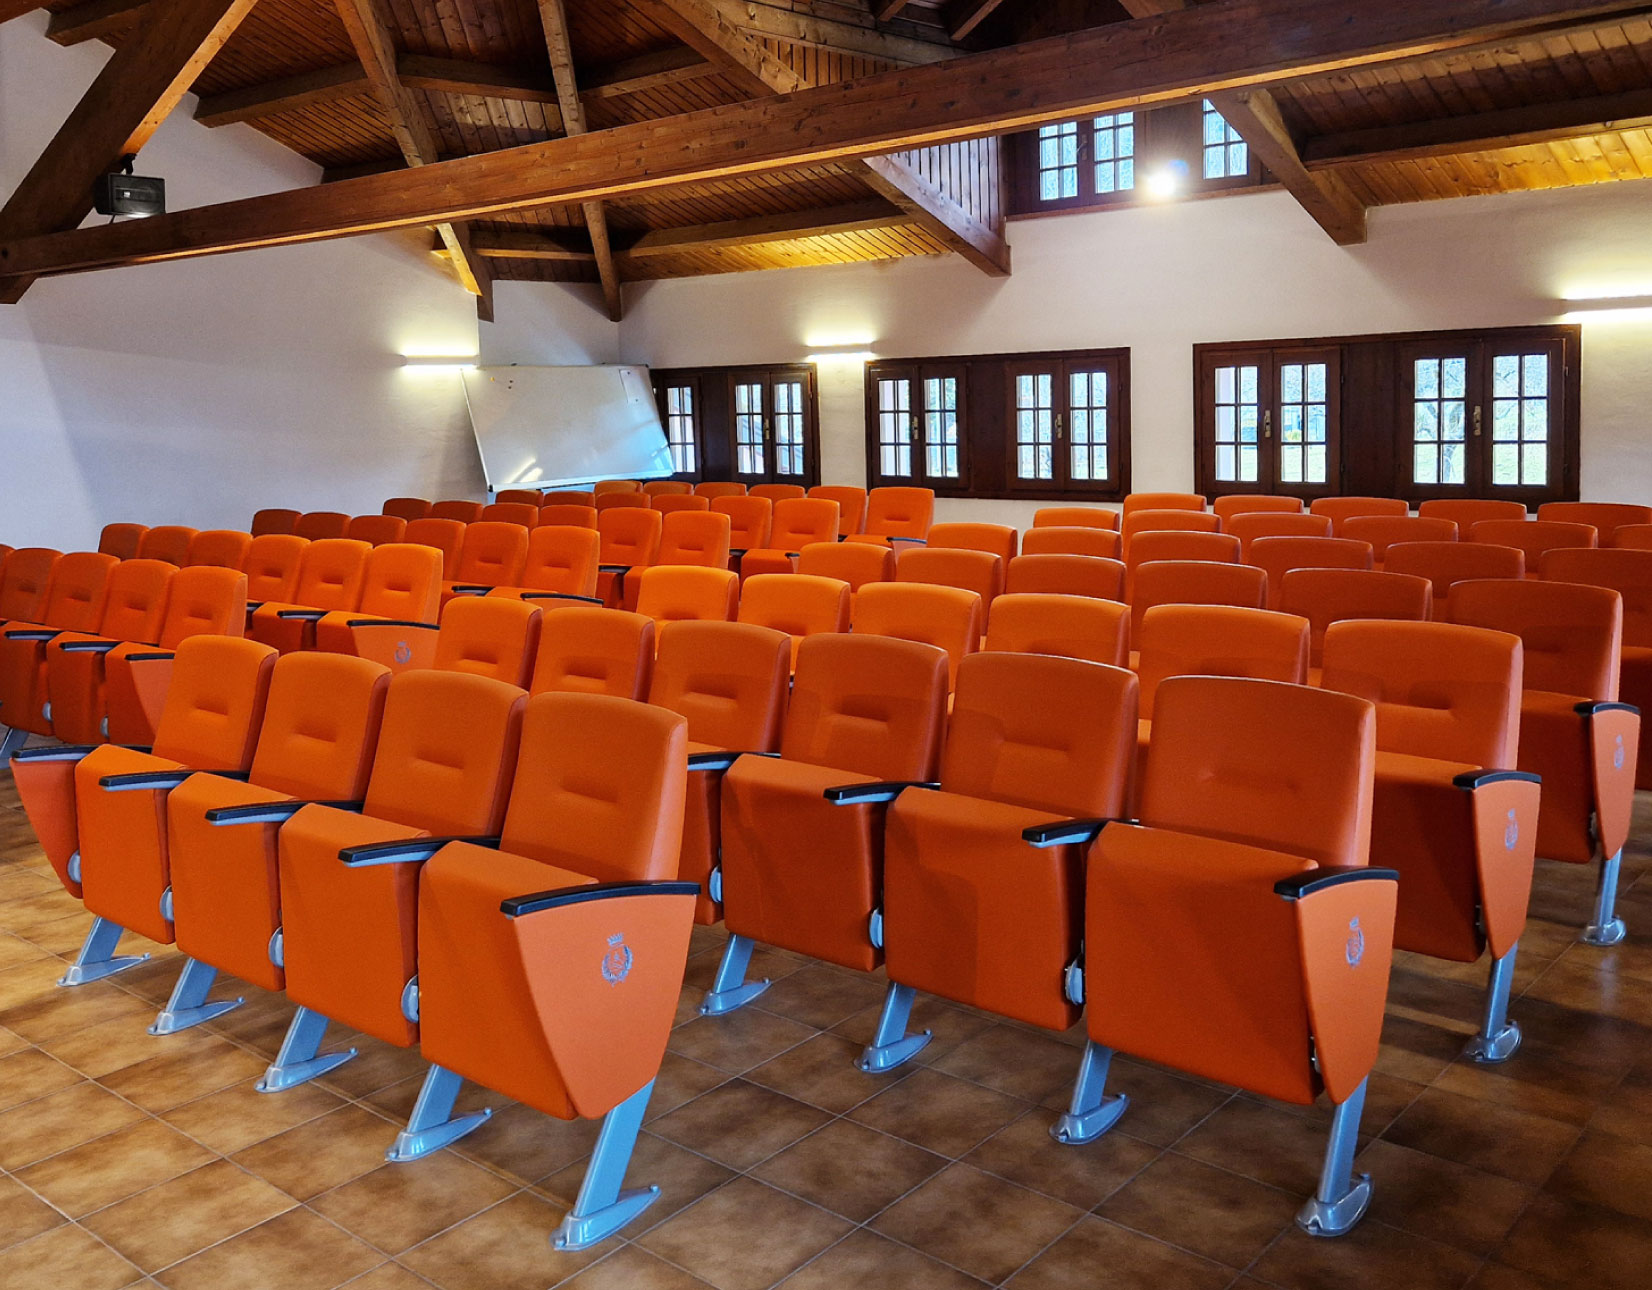 Council Chamber, Verzegnis municipality (UD), Italy